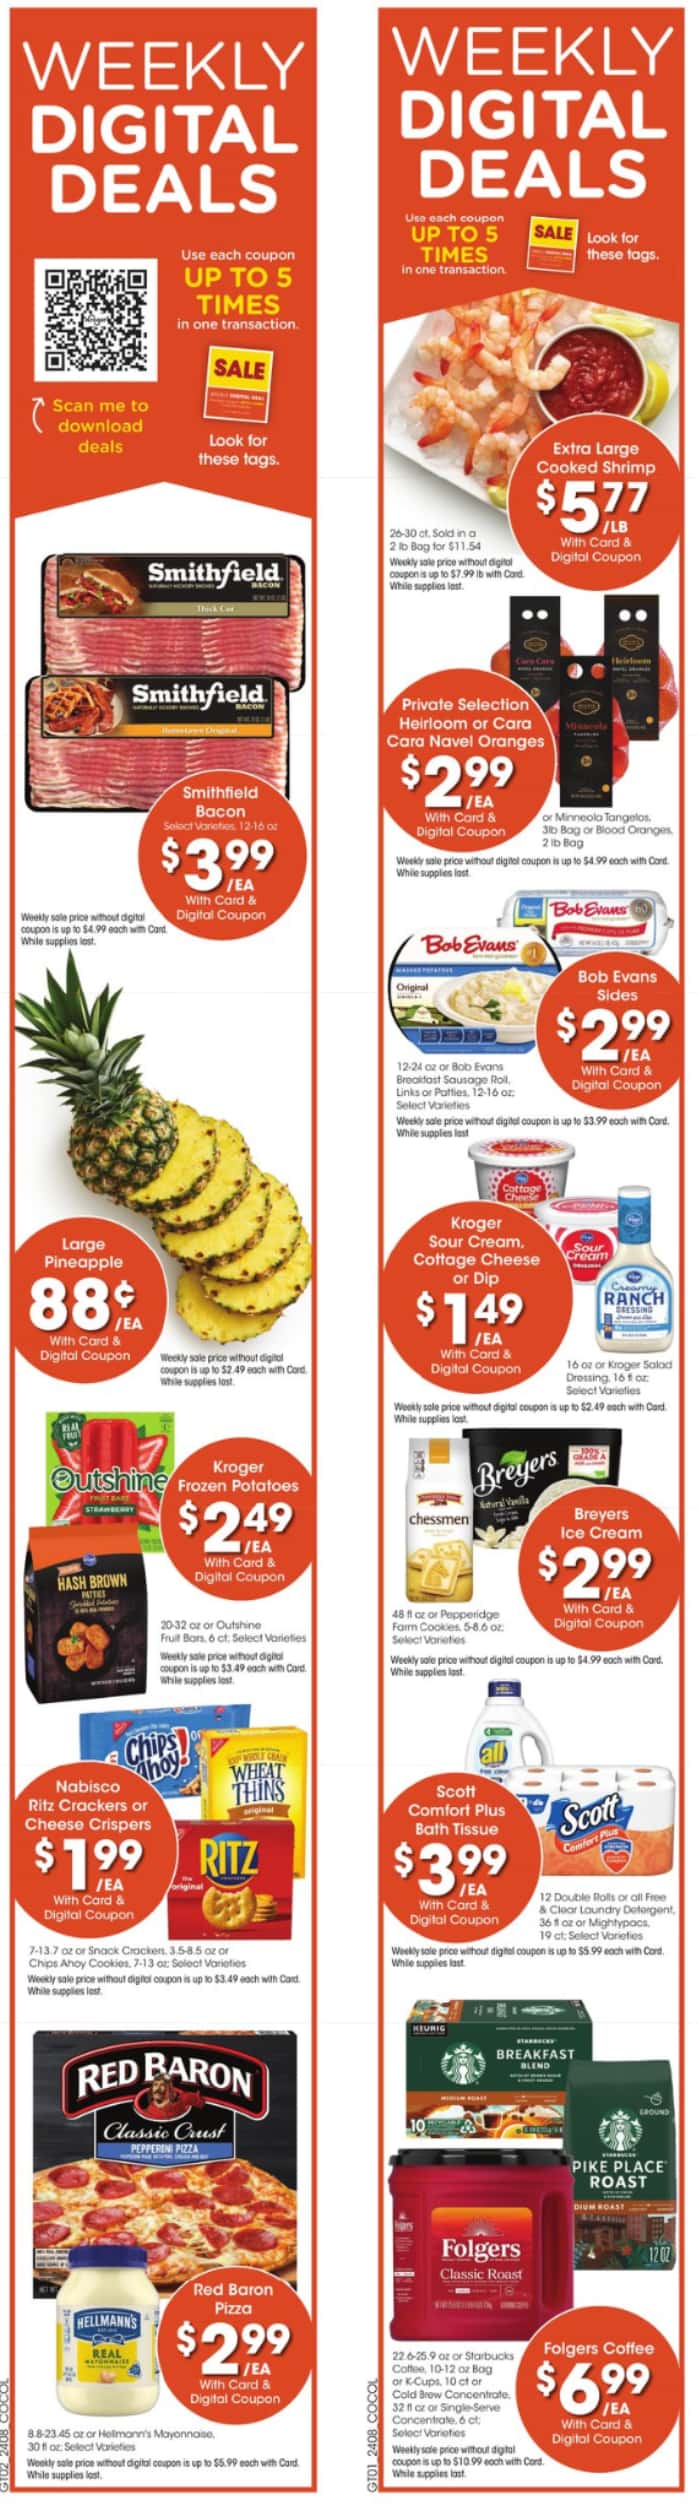 Kroger weekly ad preview